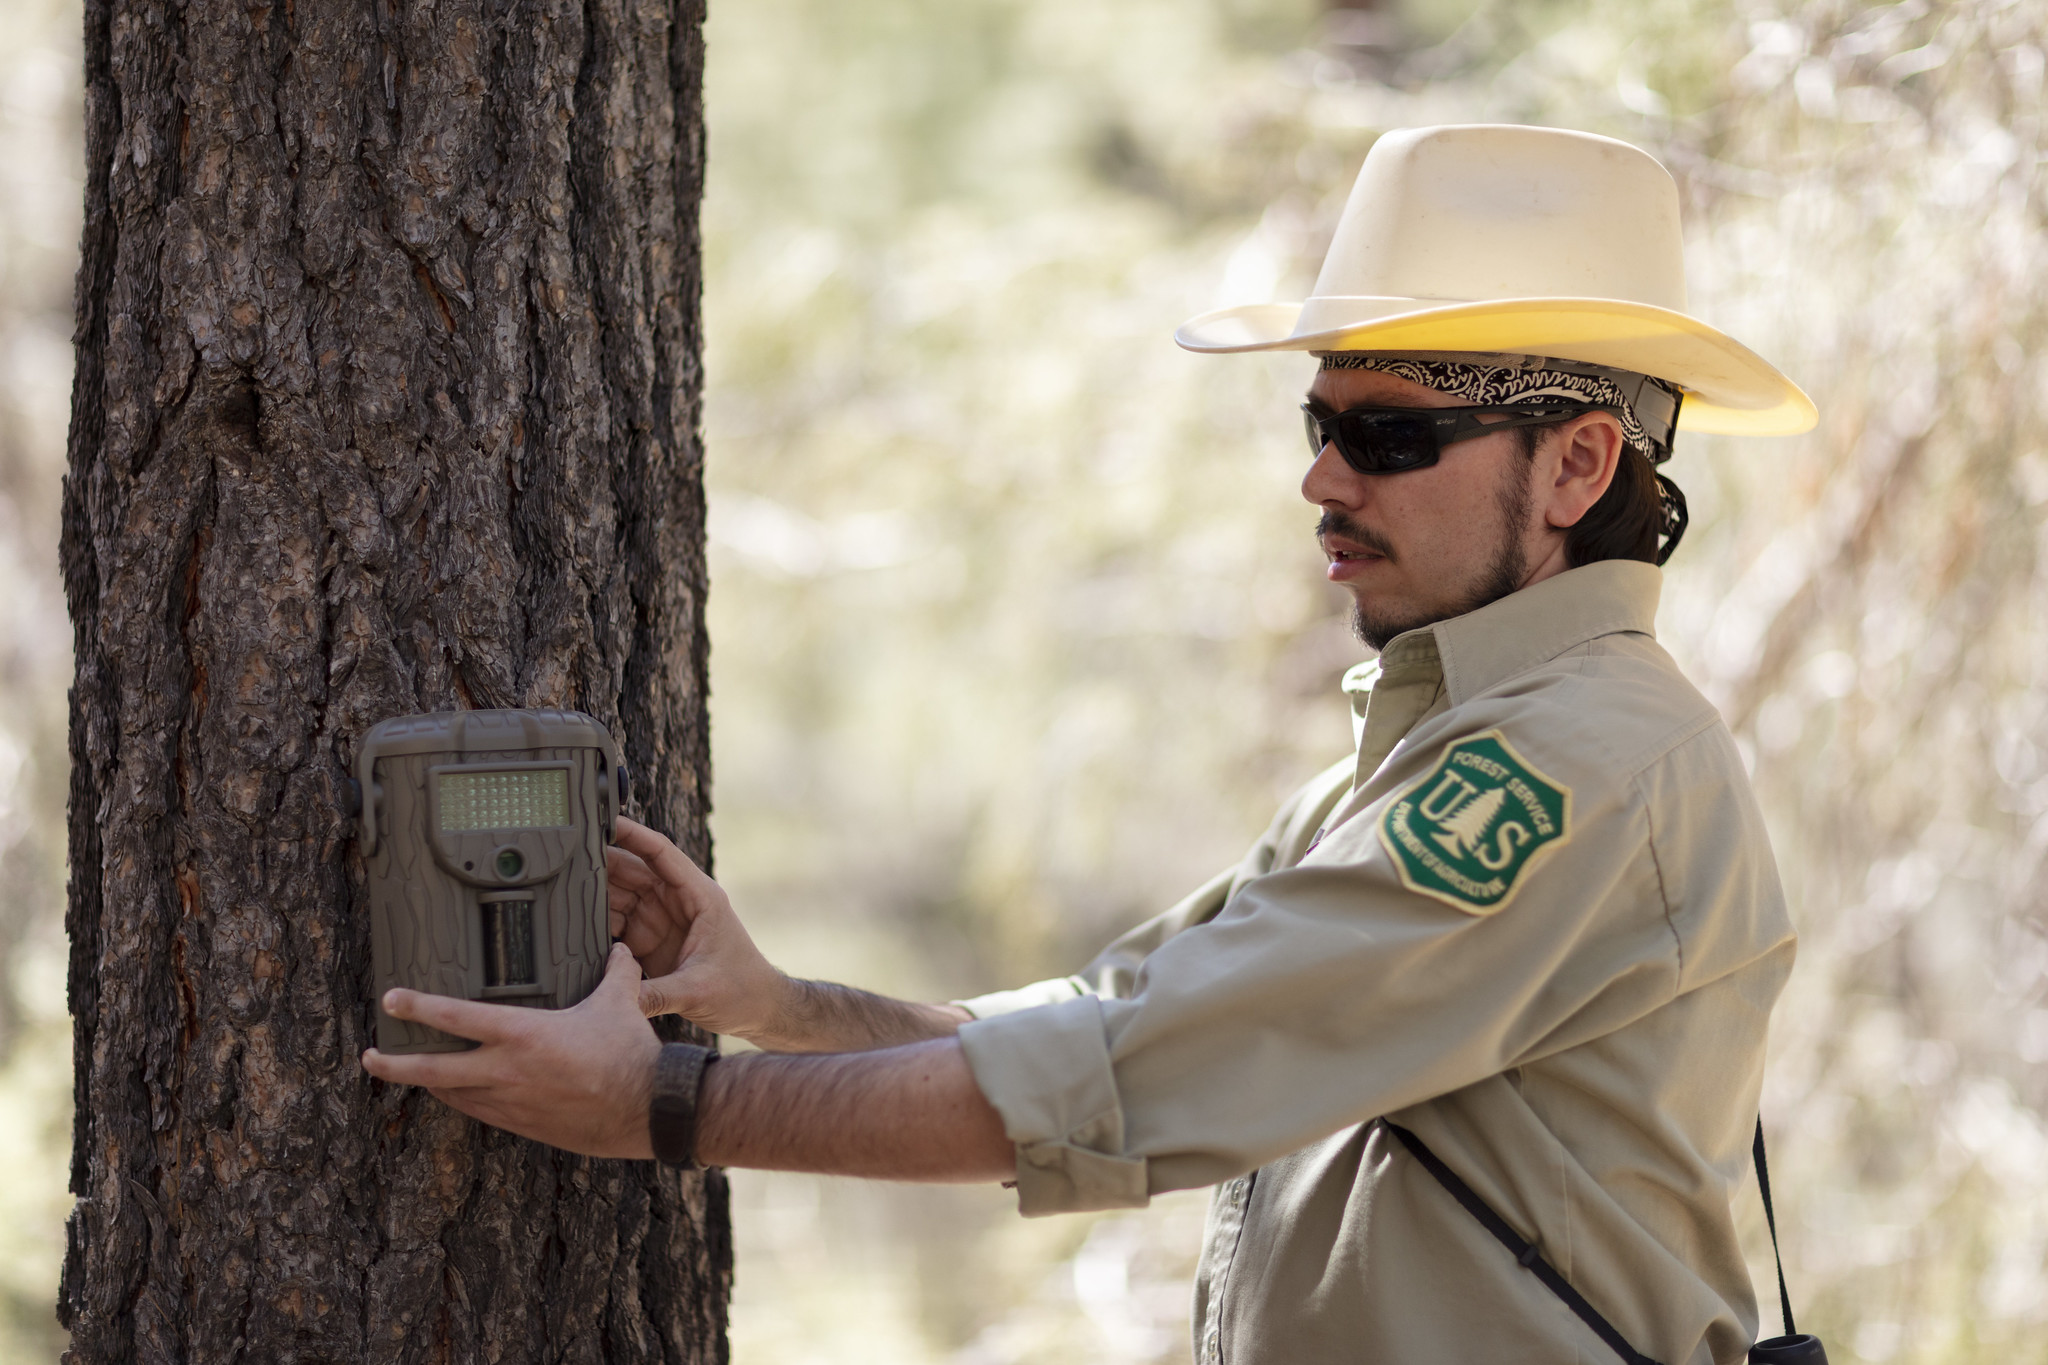 An employee holds a device on a tree to perform a test.